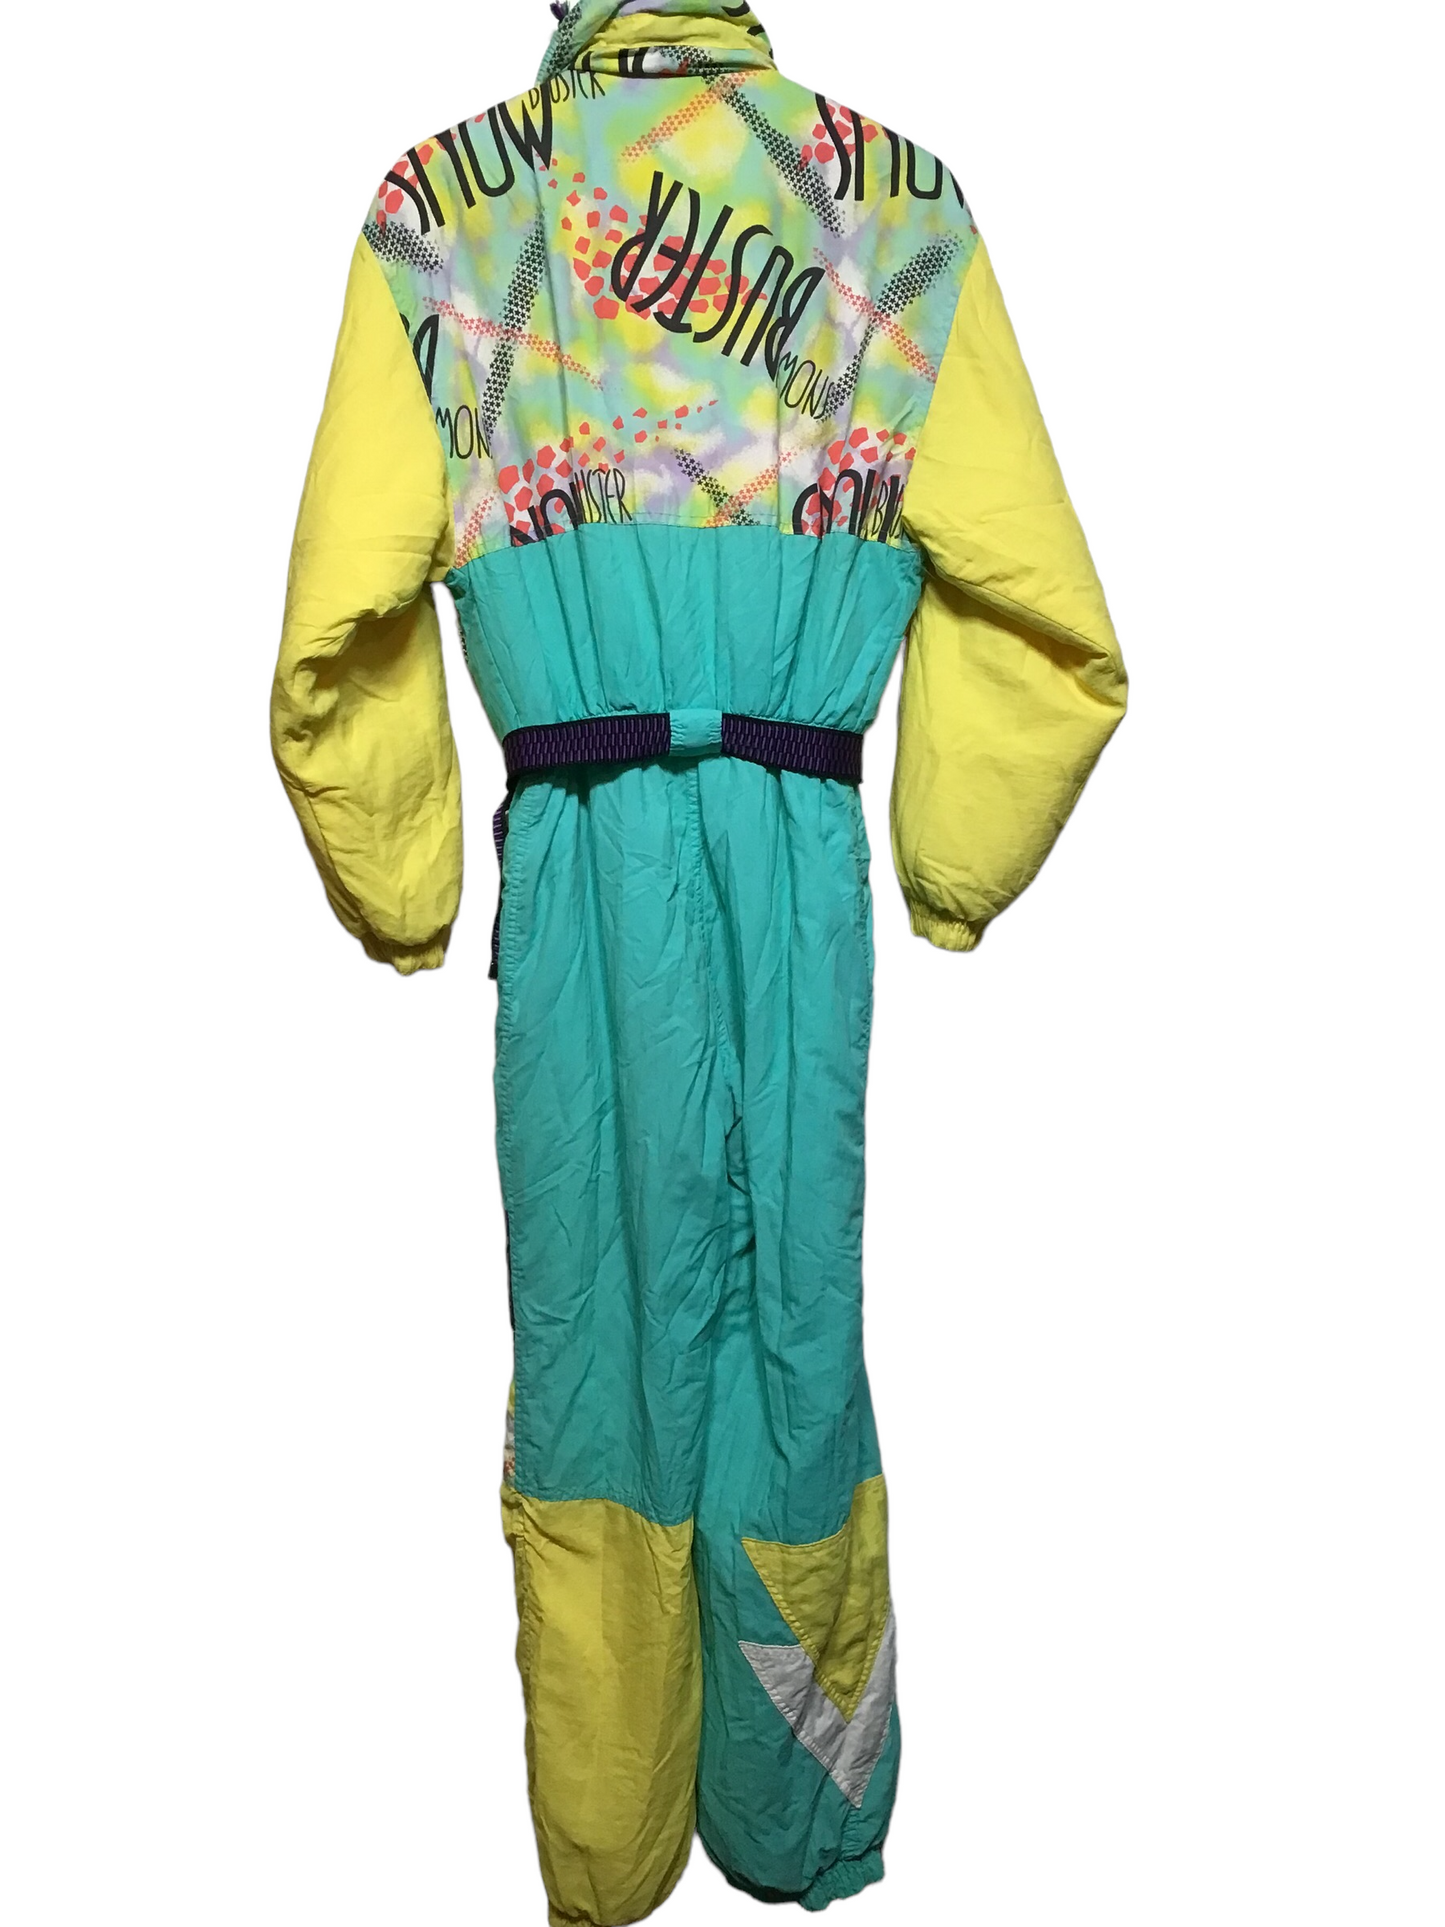 Snow Buster Ski Suit (Size XS)